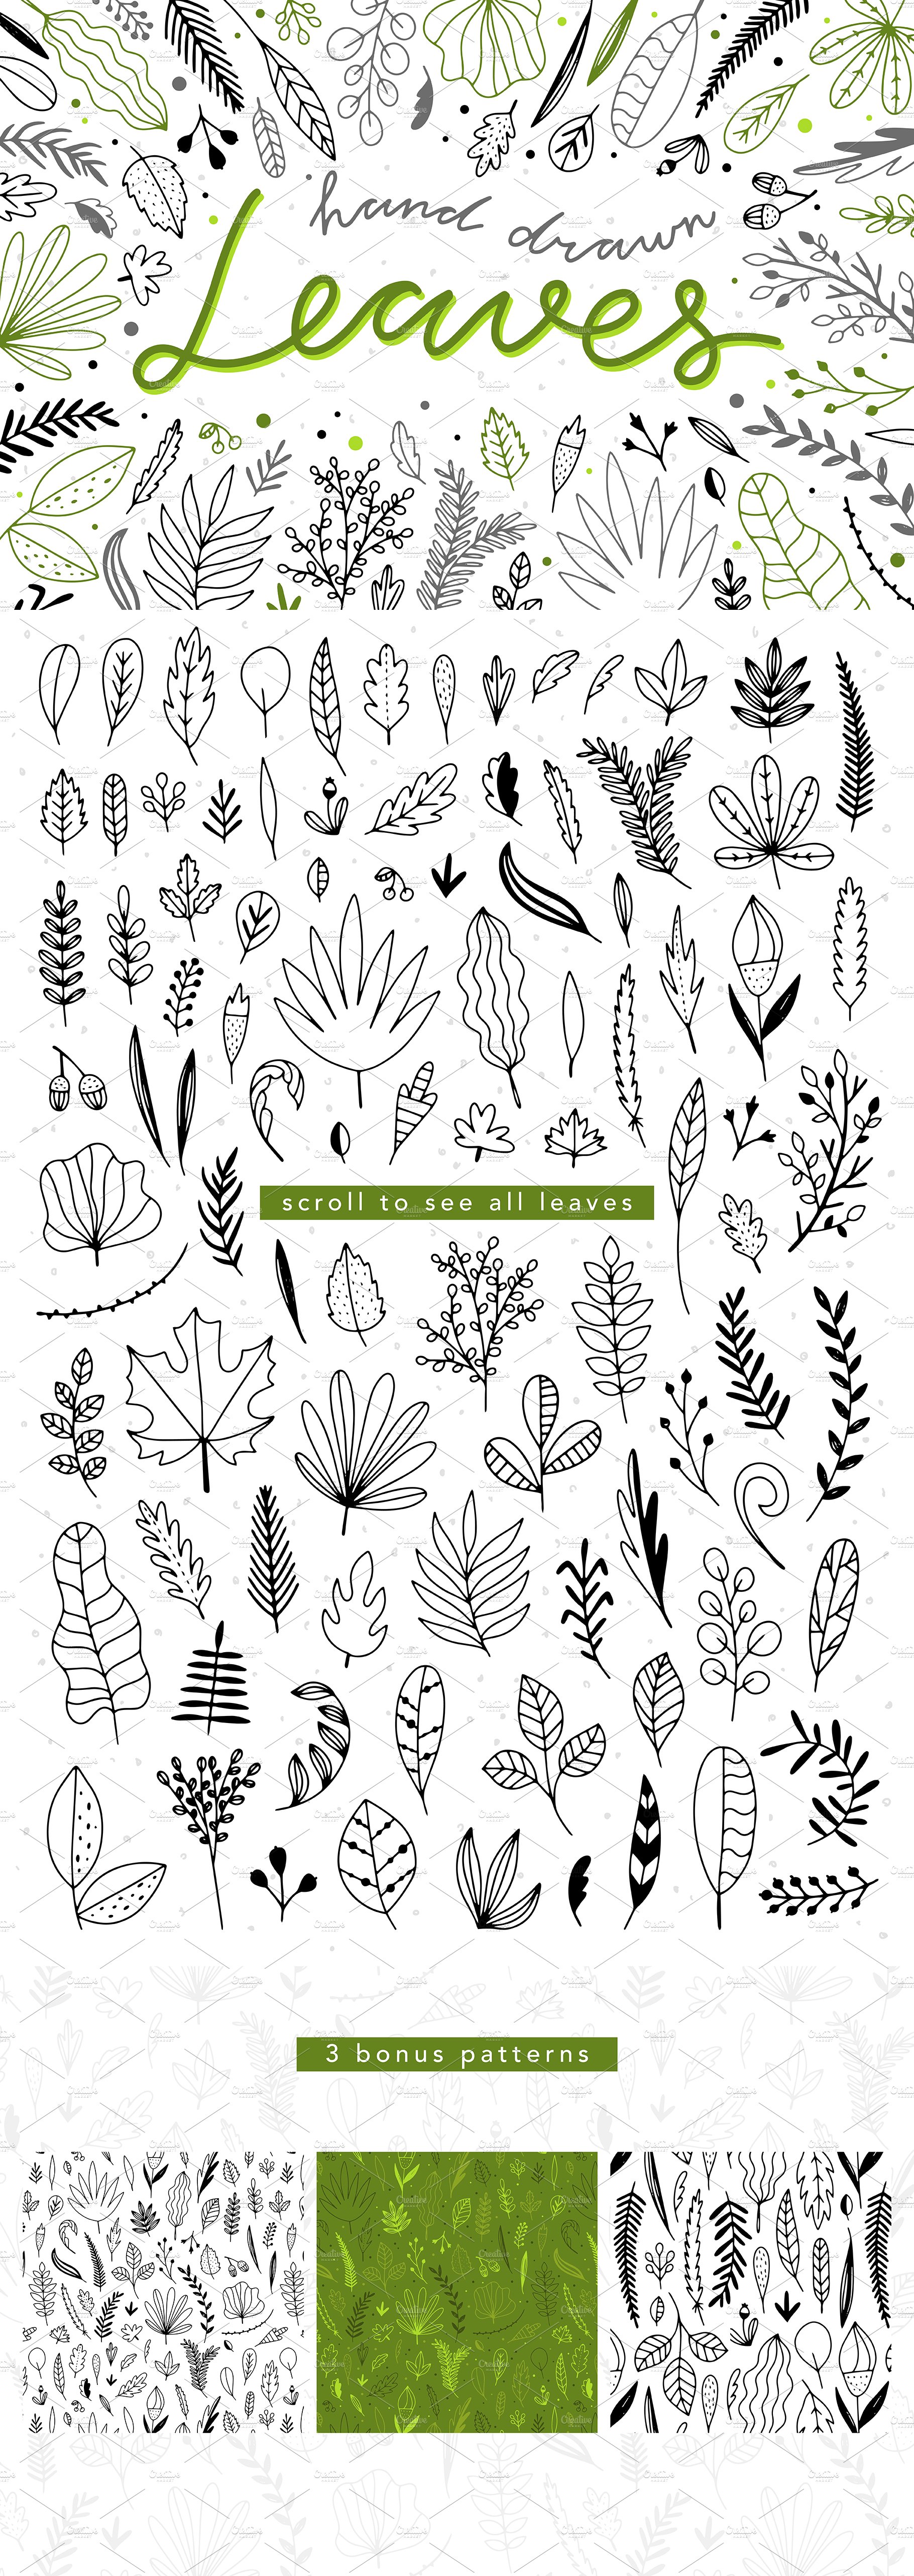 Large collection of hand drawn leaves and plants.